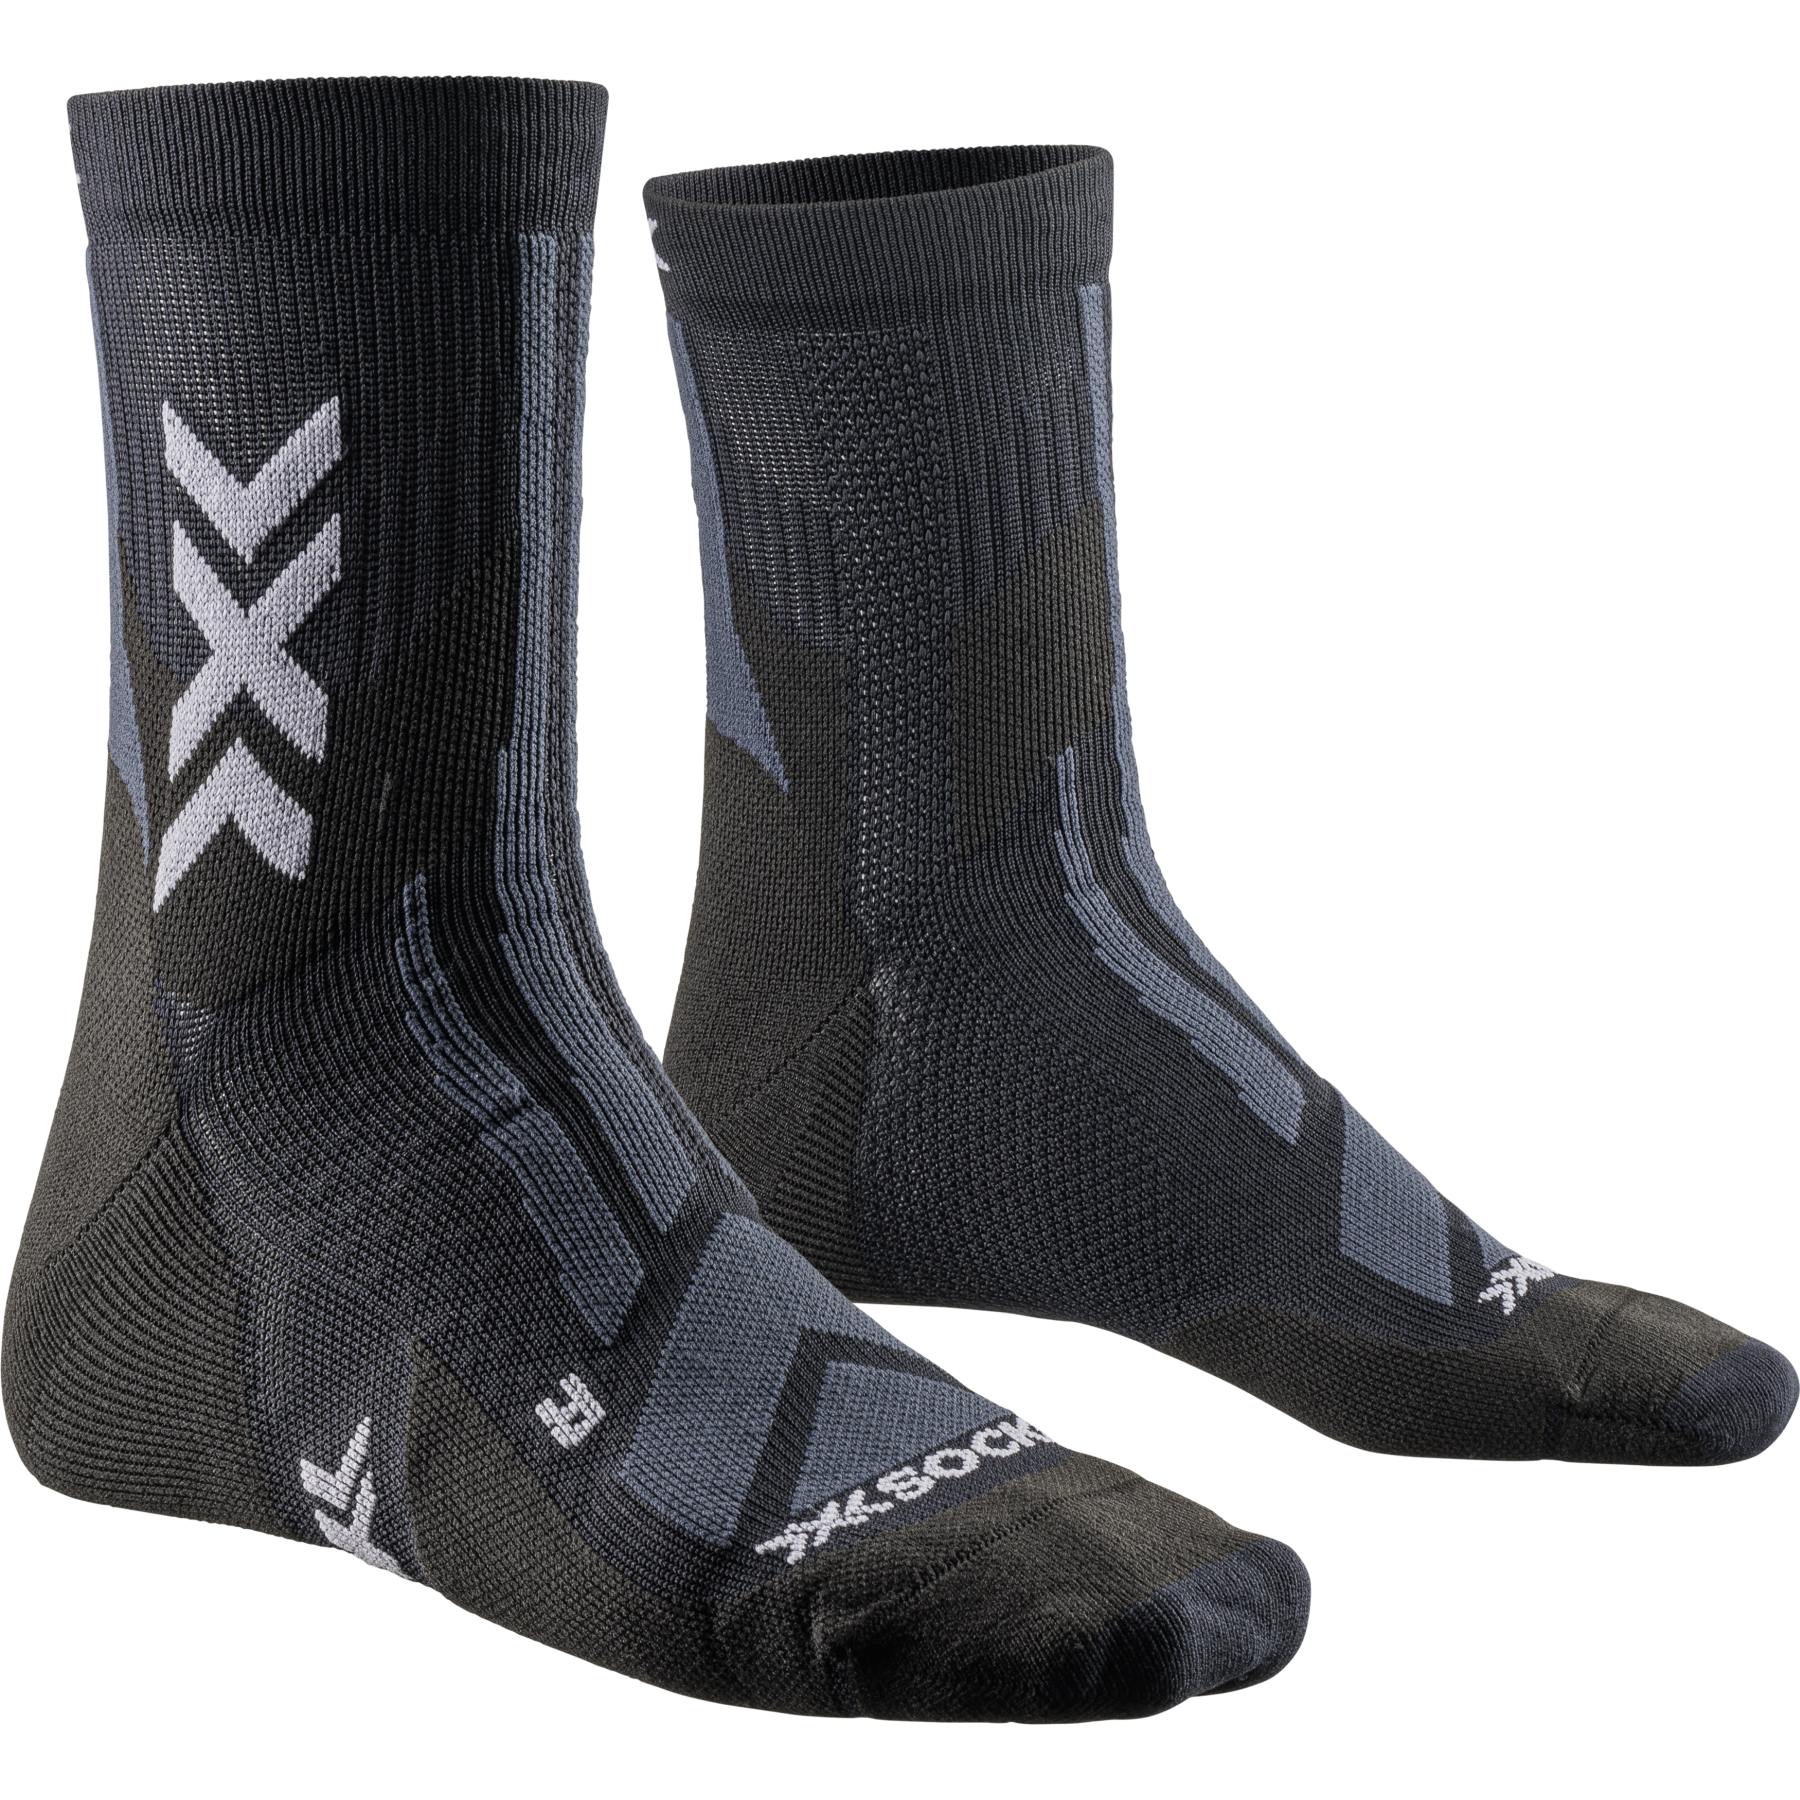 Picture of X-Socks Hike Discover Ankle Socks - black/charcoal